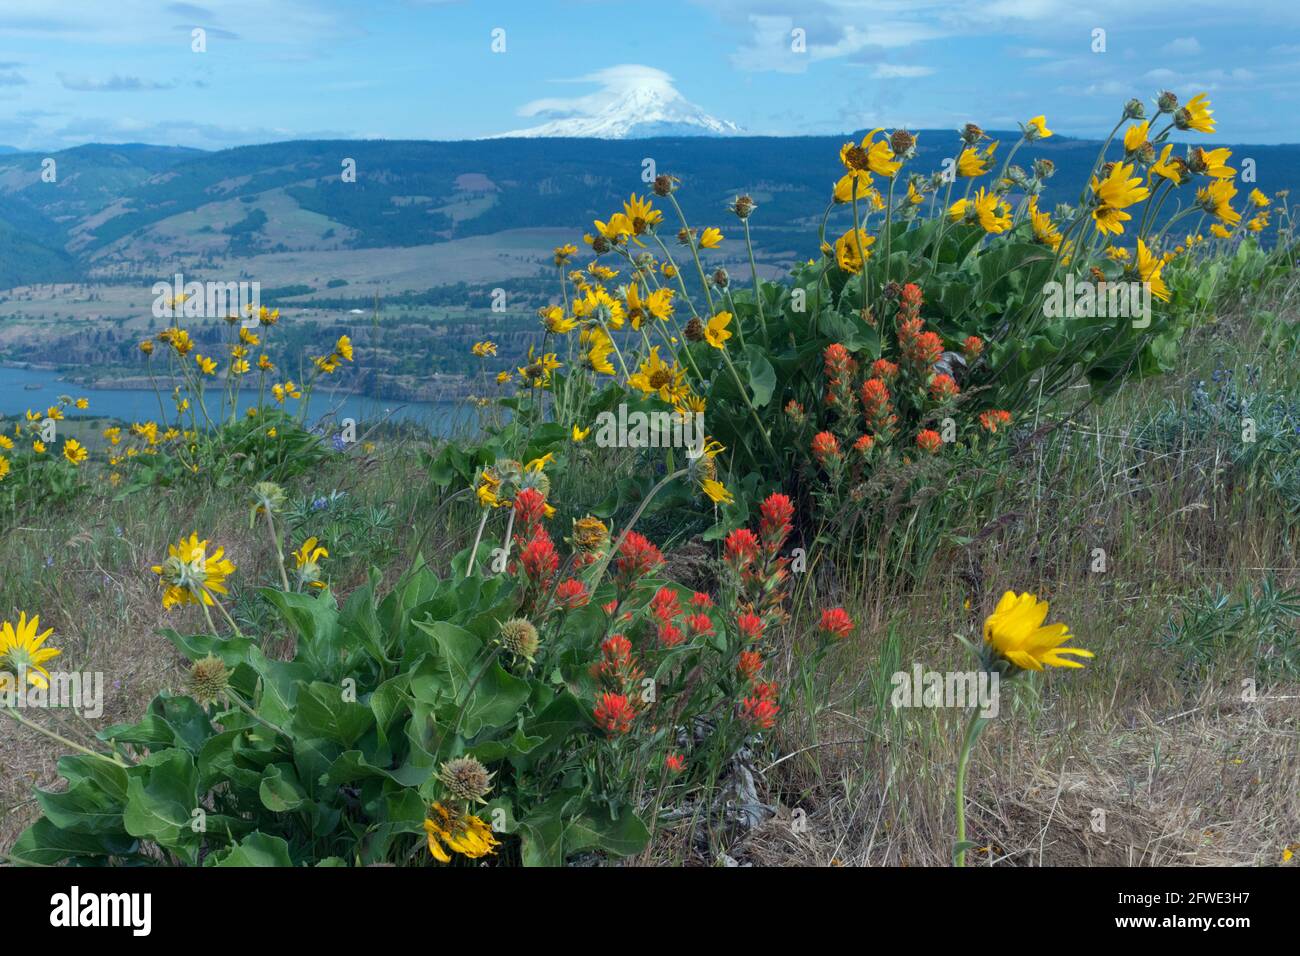 Red Indian Paintbrush and yellow Balsamroot flowers bloom at the Tom McCall Preserve, overlooking the Columbia River Gorge with a view of Mt. Adams. Stock Photo